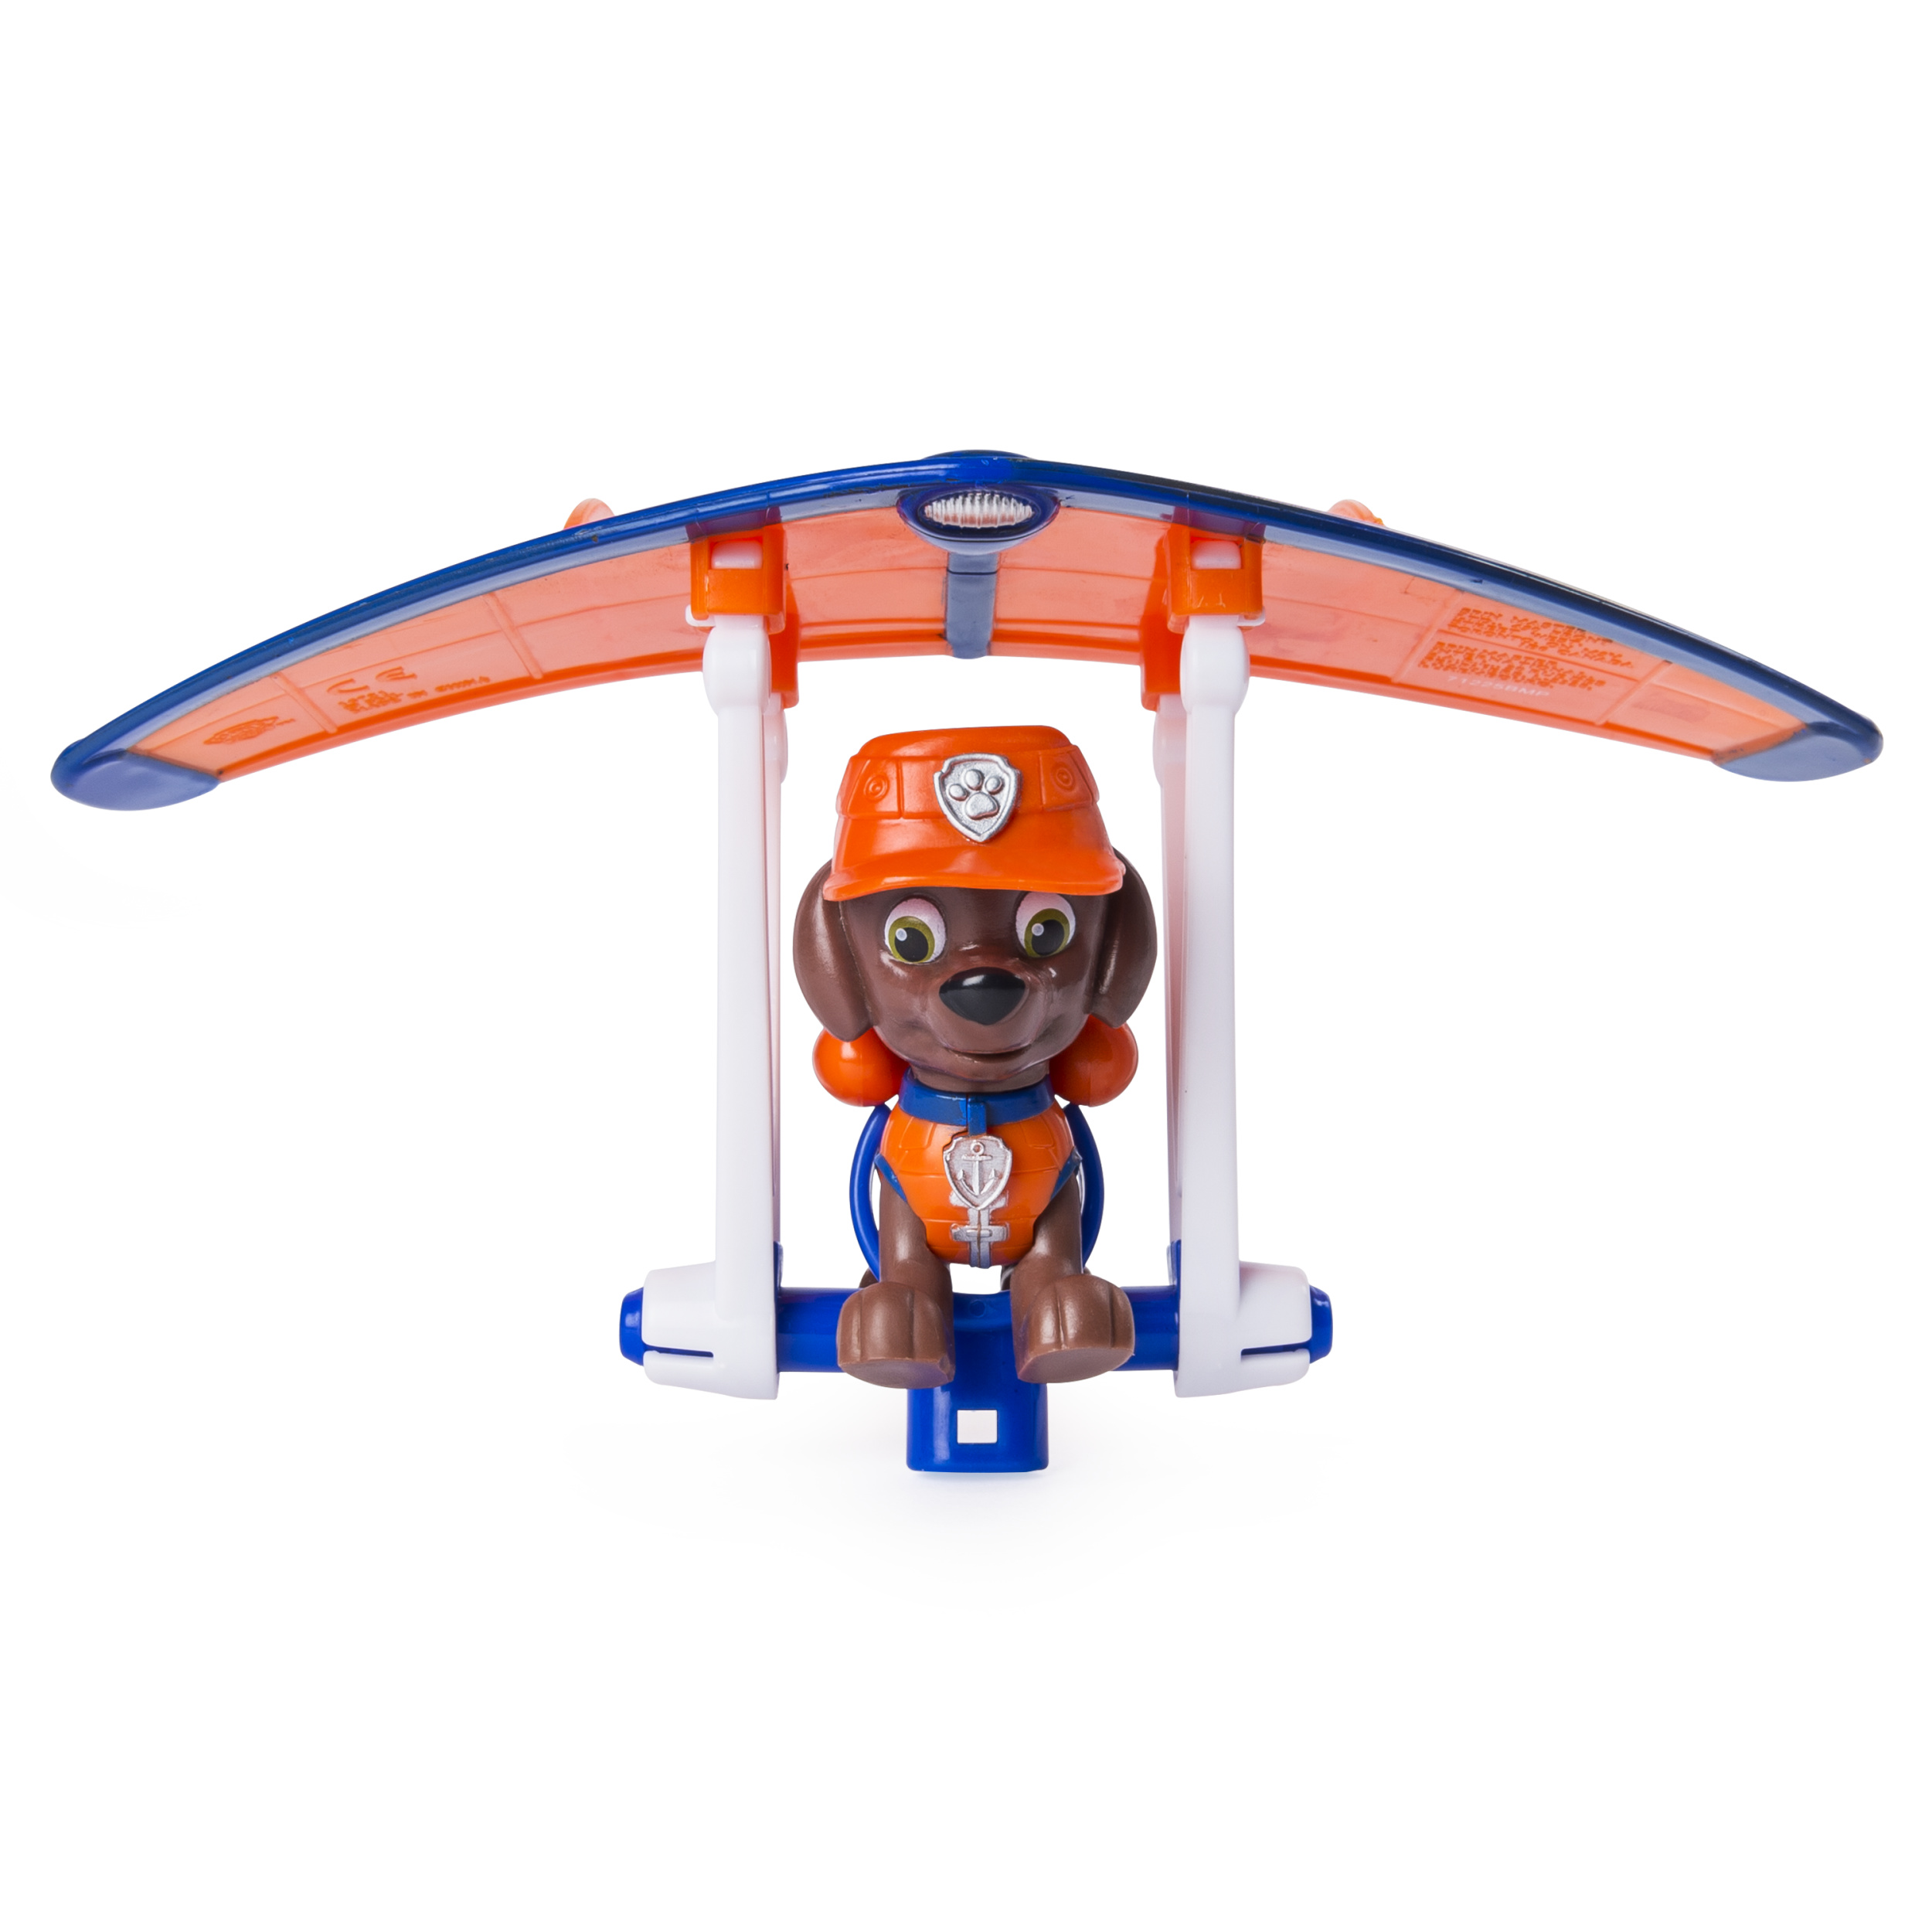 PAW Patrol Ultimate Rescue, Zuma’s Mini Hang Glider with Collectible Figure for Ages 3 and Up - image 5 of 6